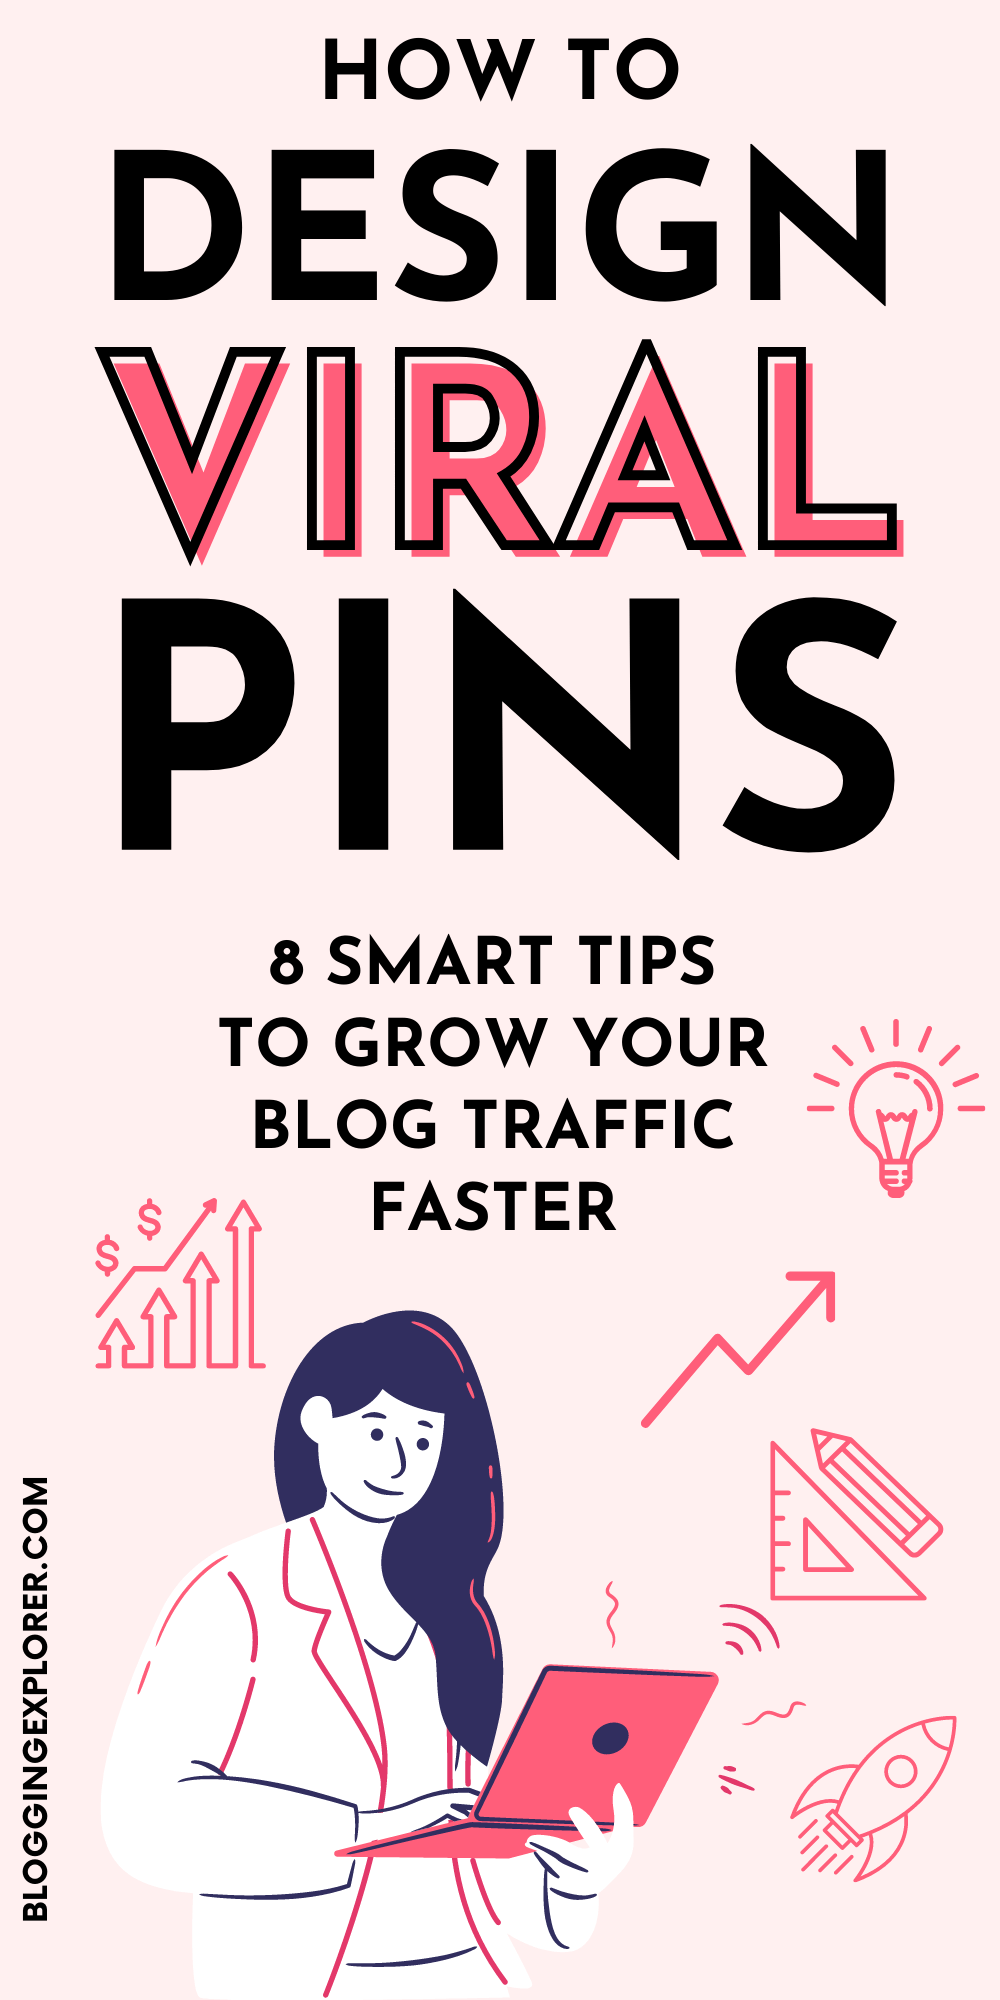 How to design viral pins - Pinterest marketing guide for beginners